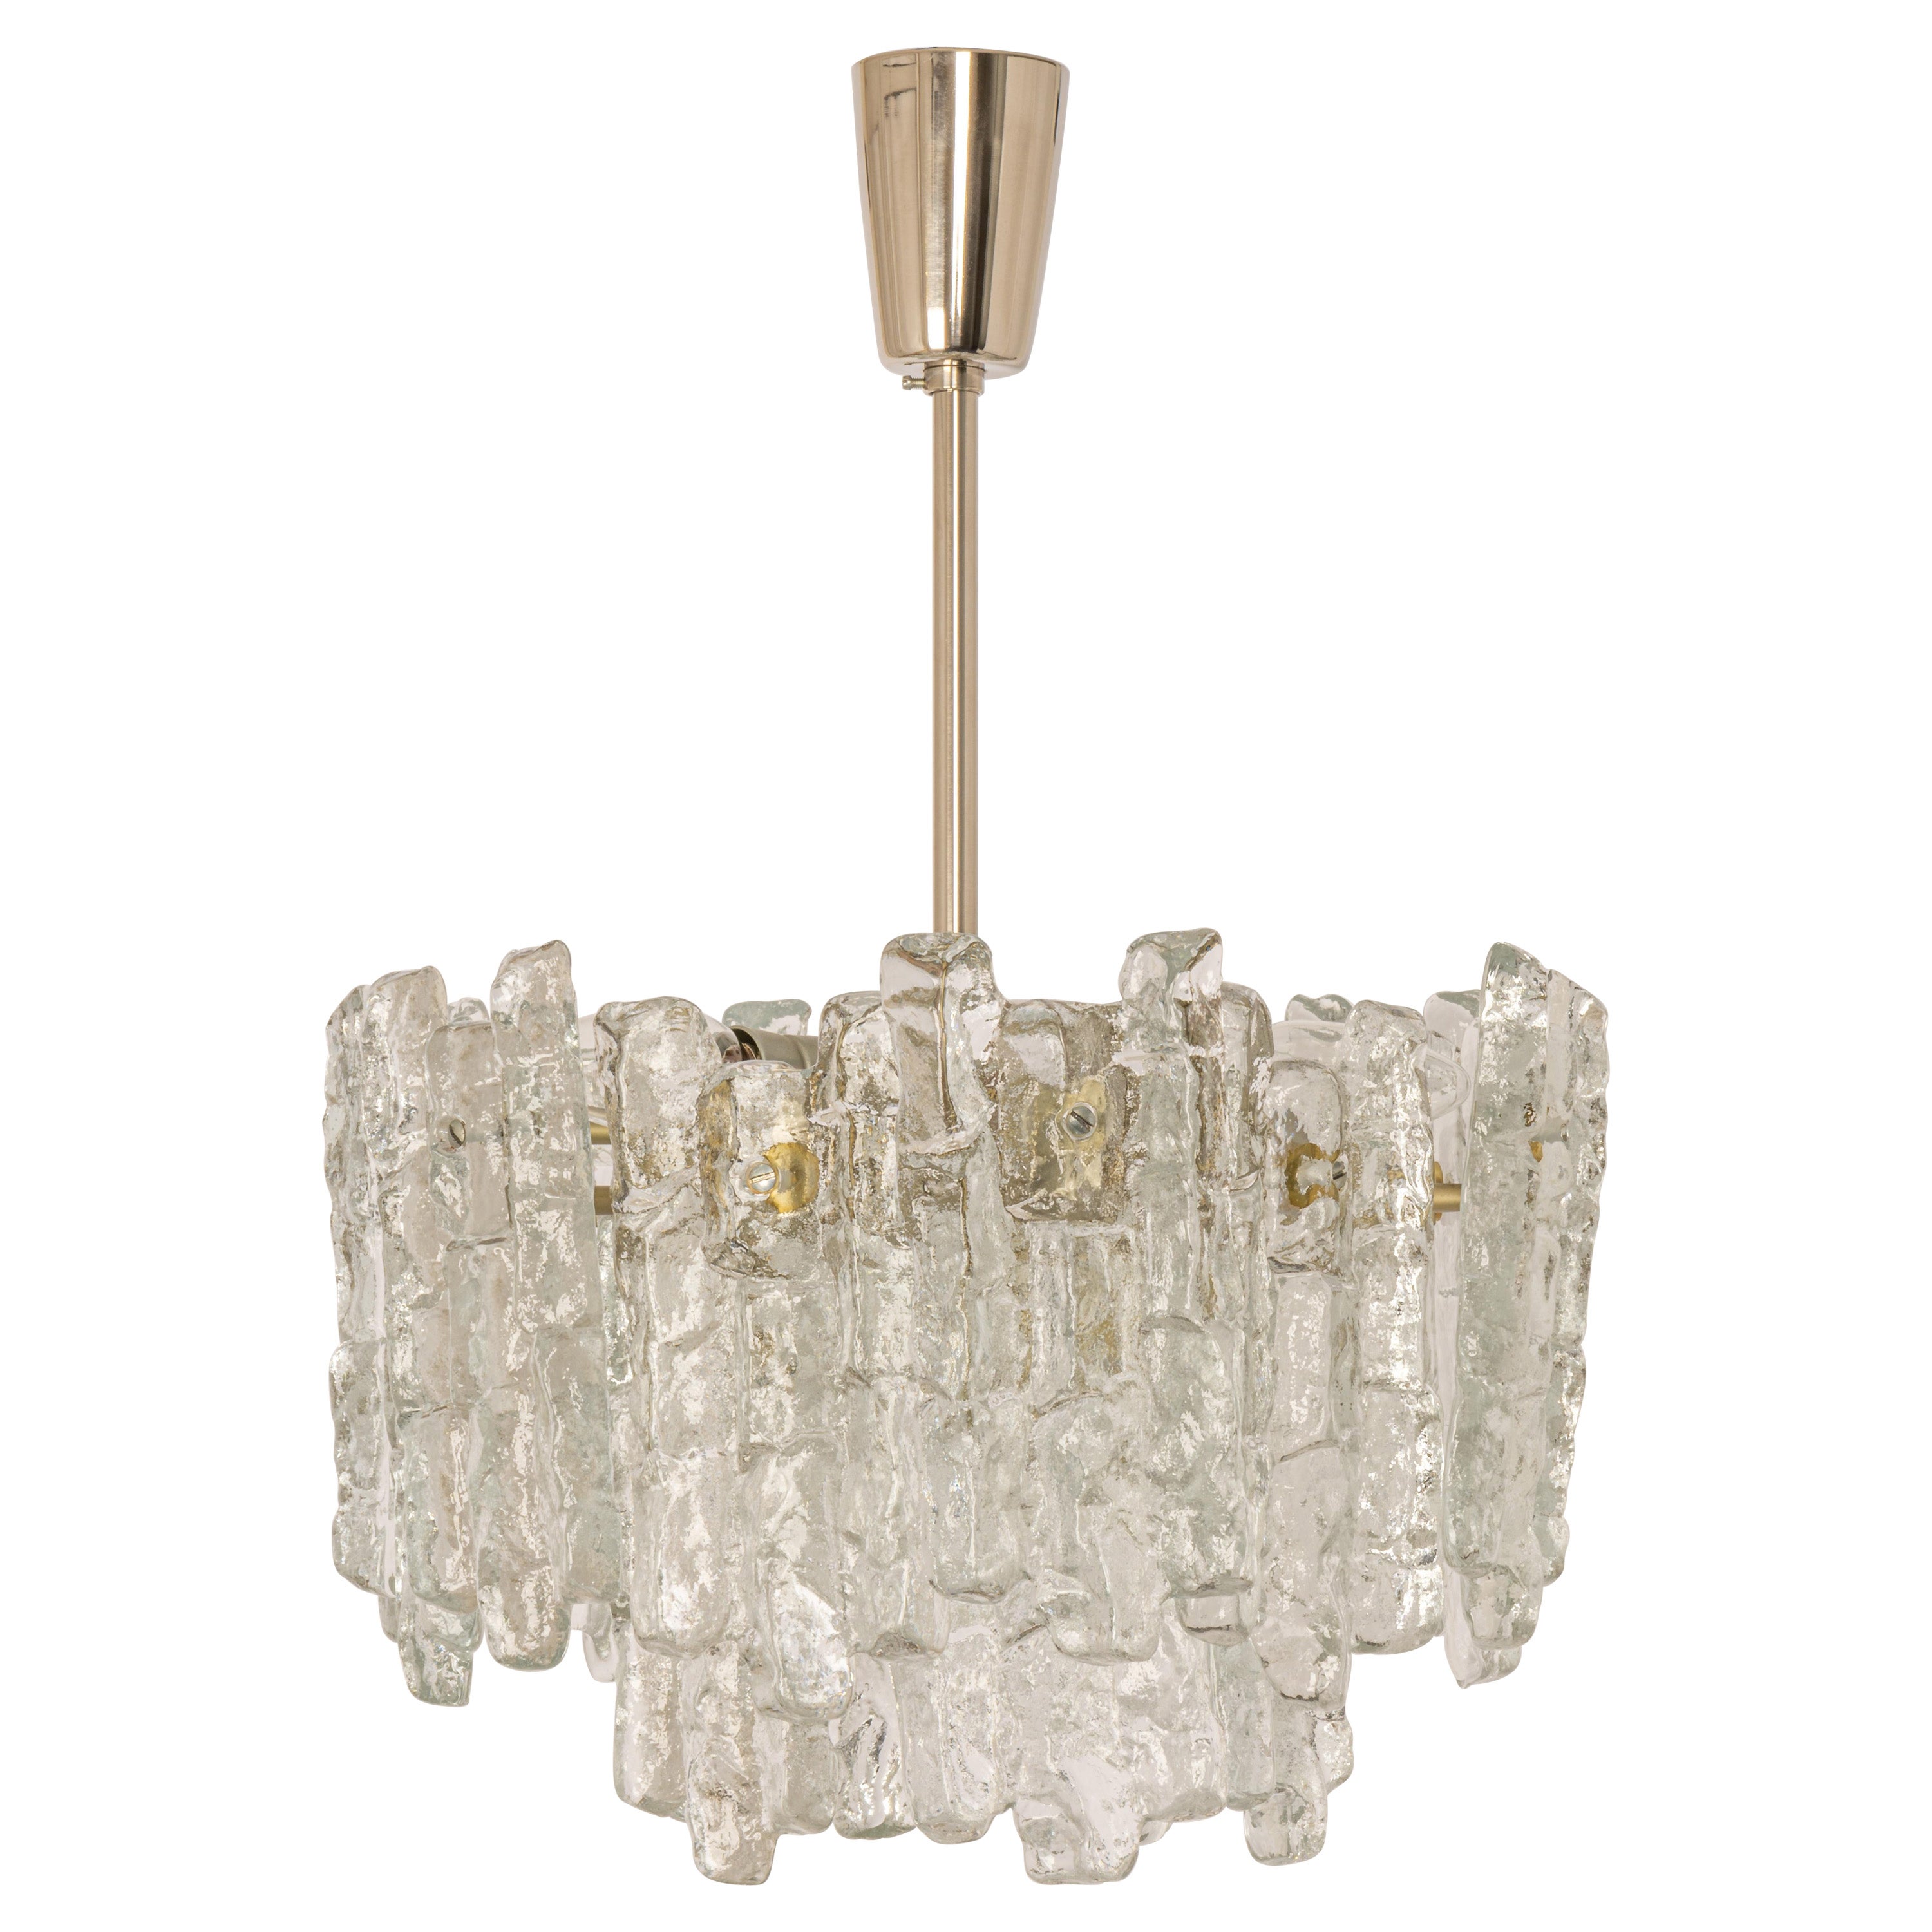 1 of 5 Large Murano Ice Glass Chandelier by Kalmar, Austria, 1960s For Sale